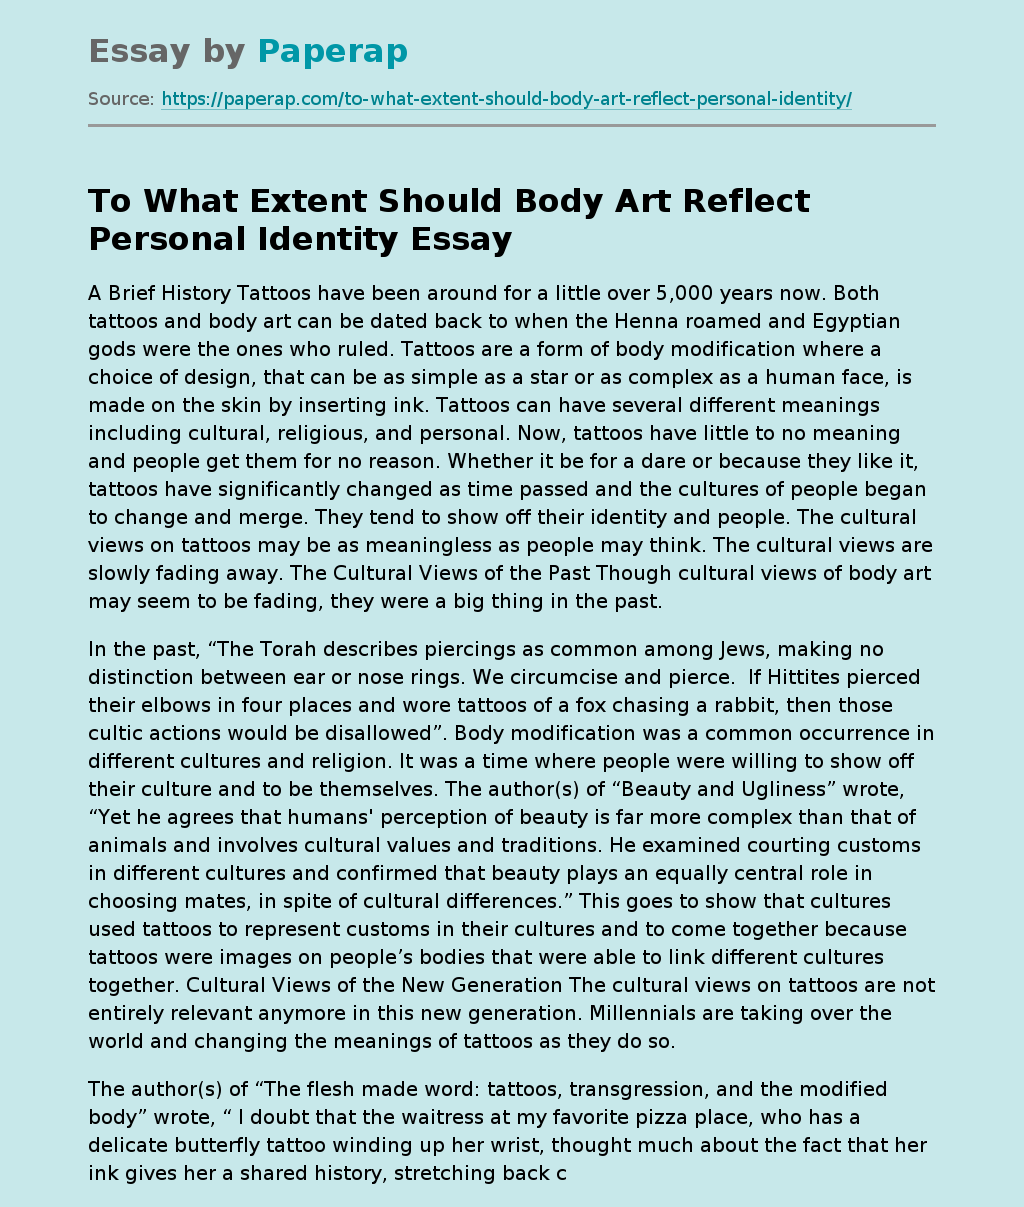 To What Extent Should Body Art Reflect Personal Identity